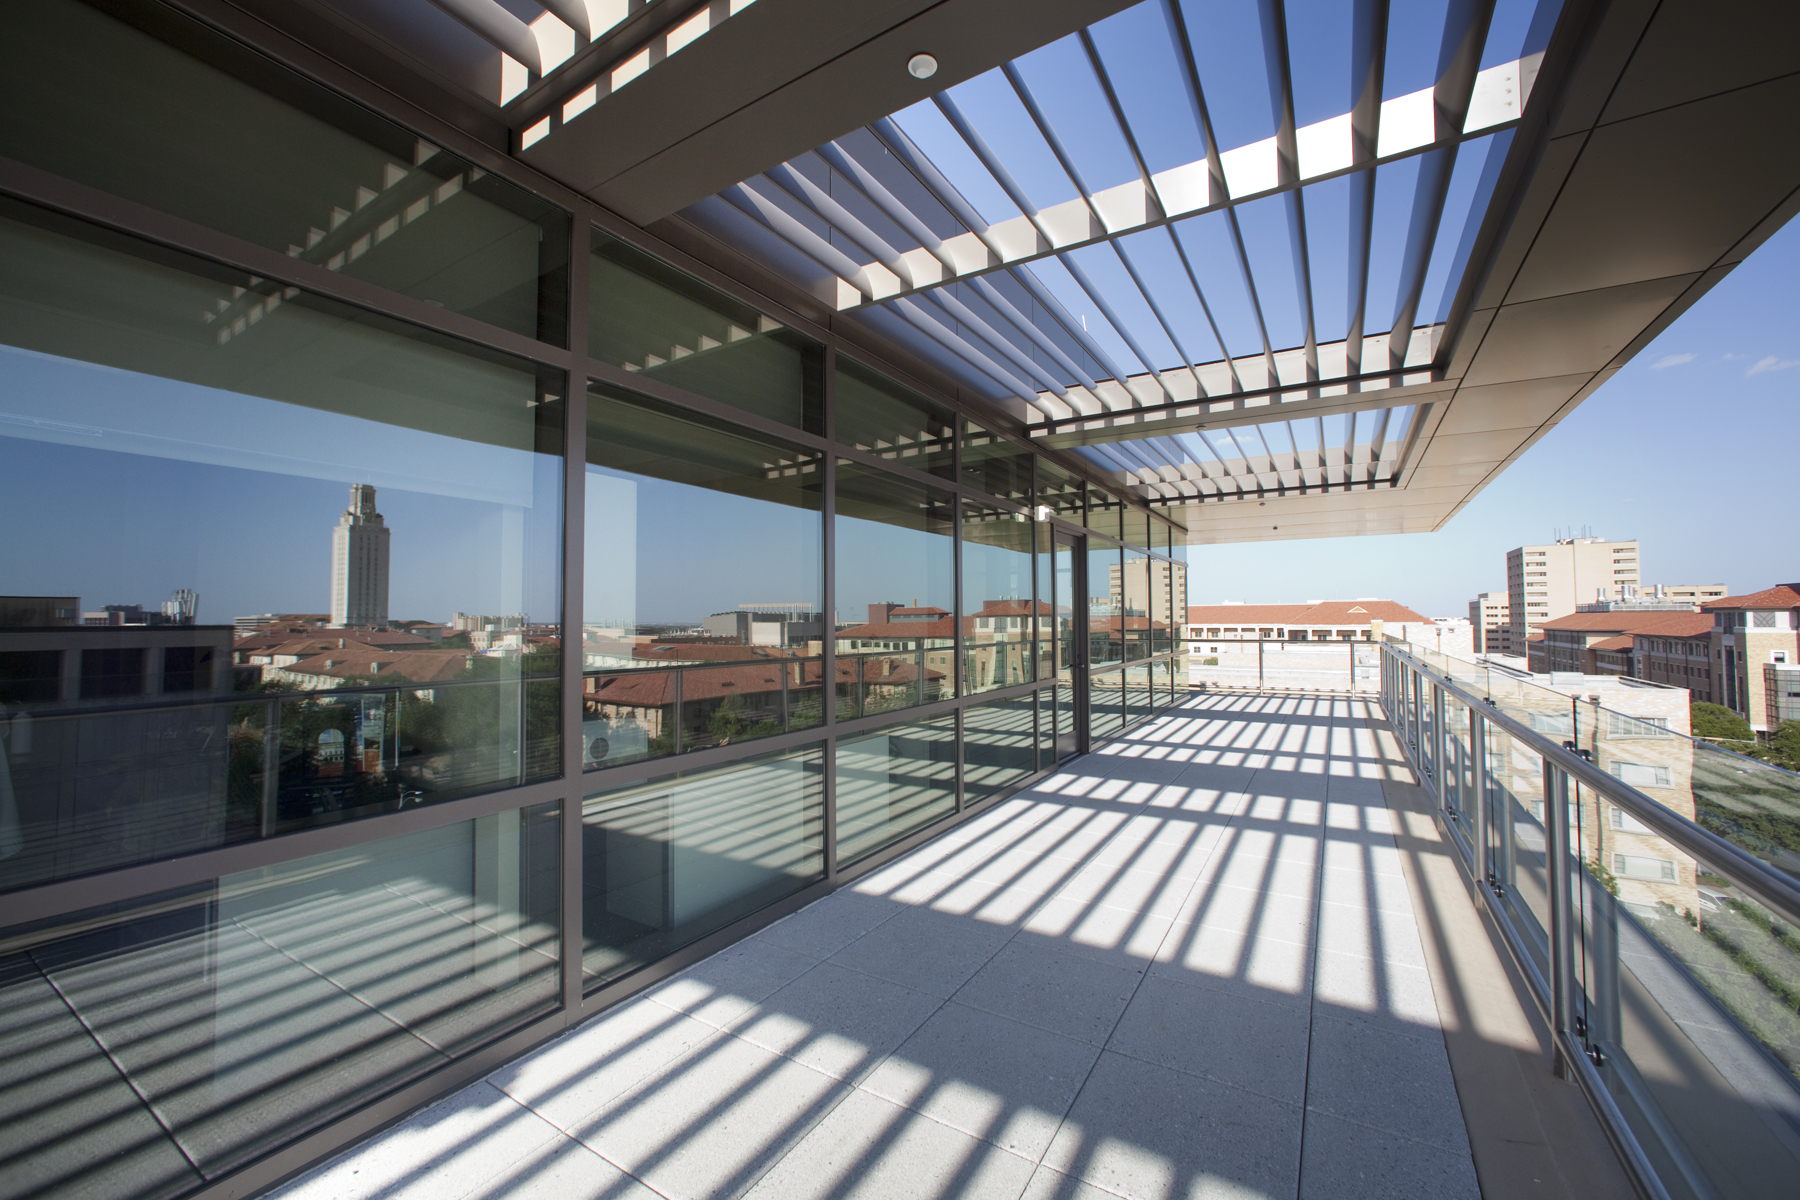 a view of campus rooftops and the tower reflected in the window of a outdoor balcony area